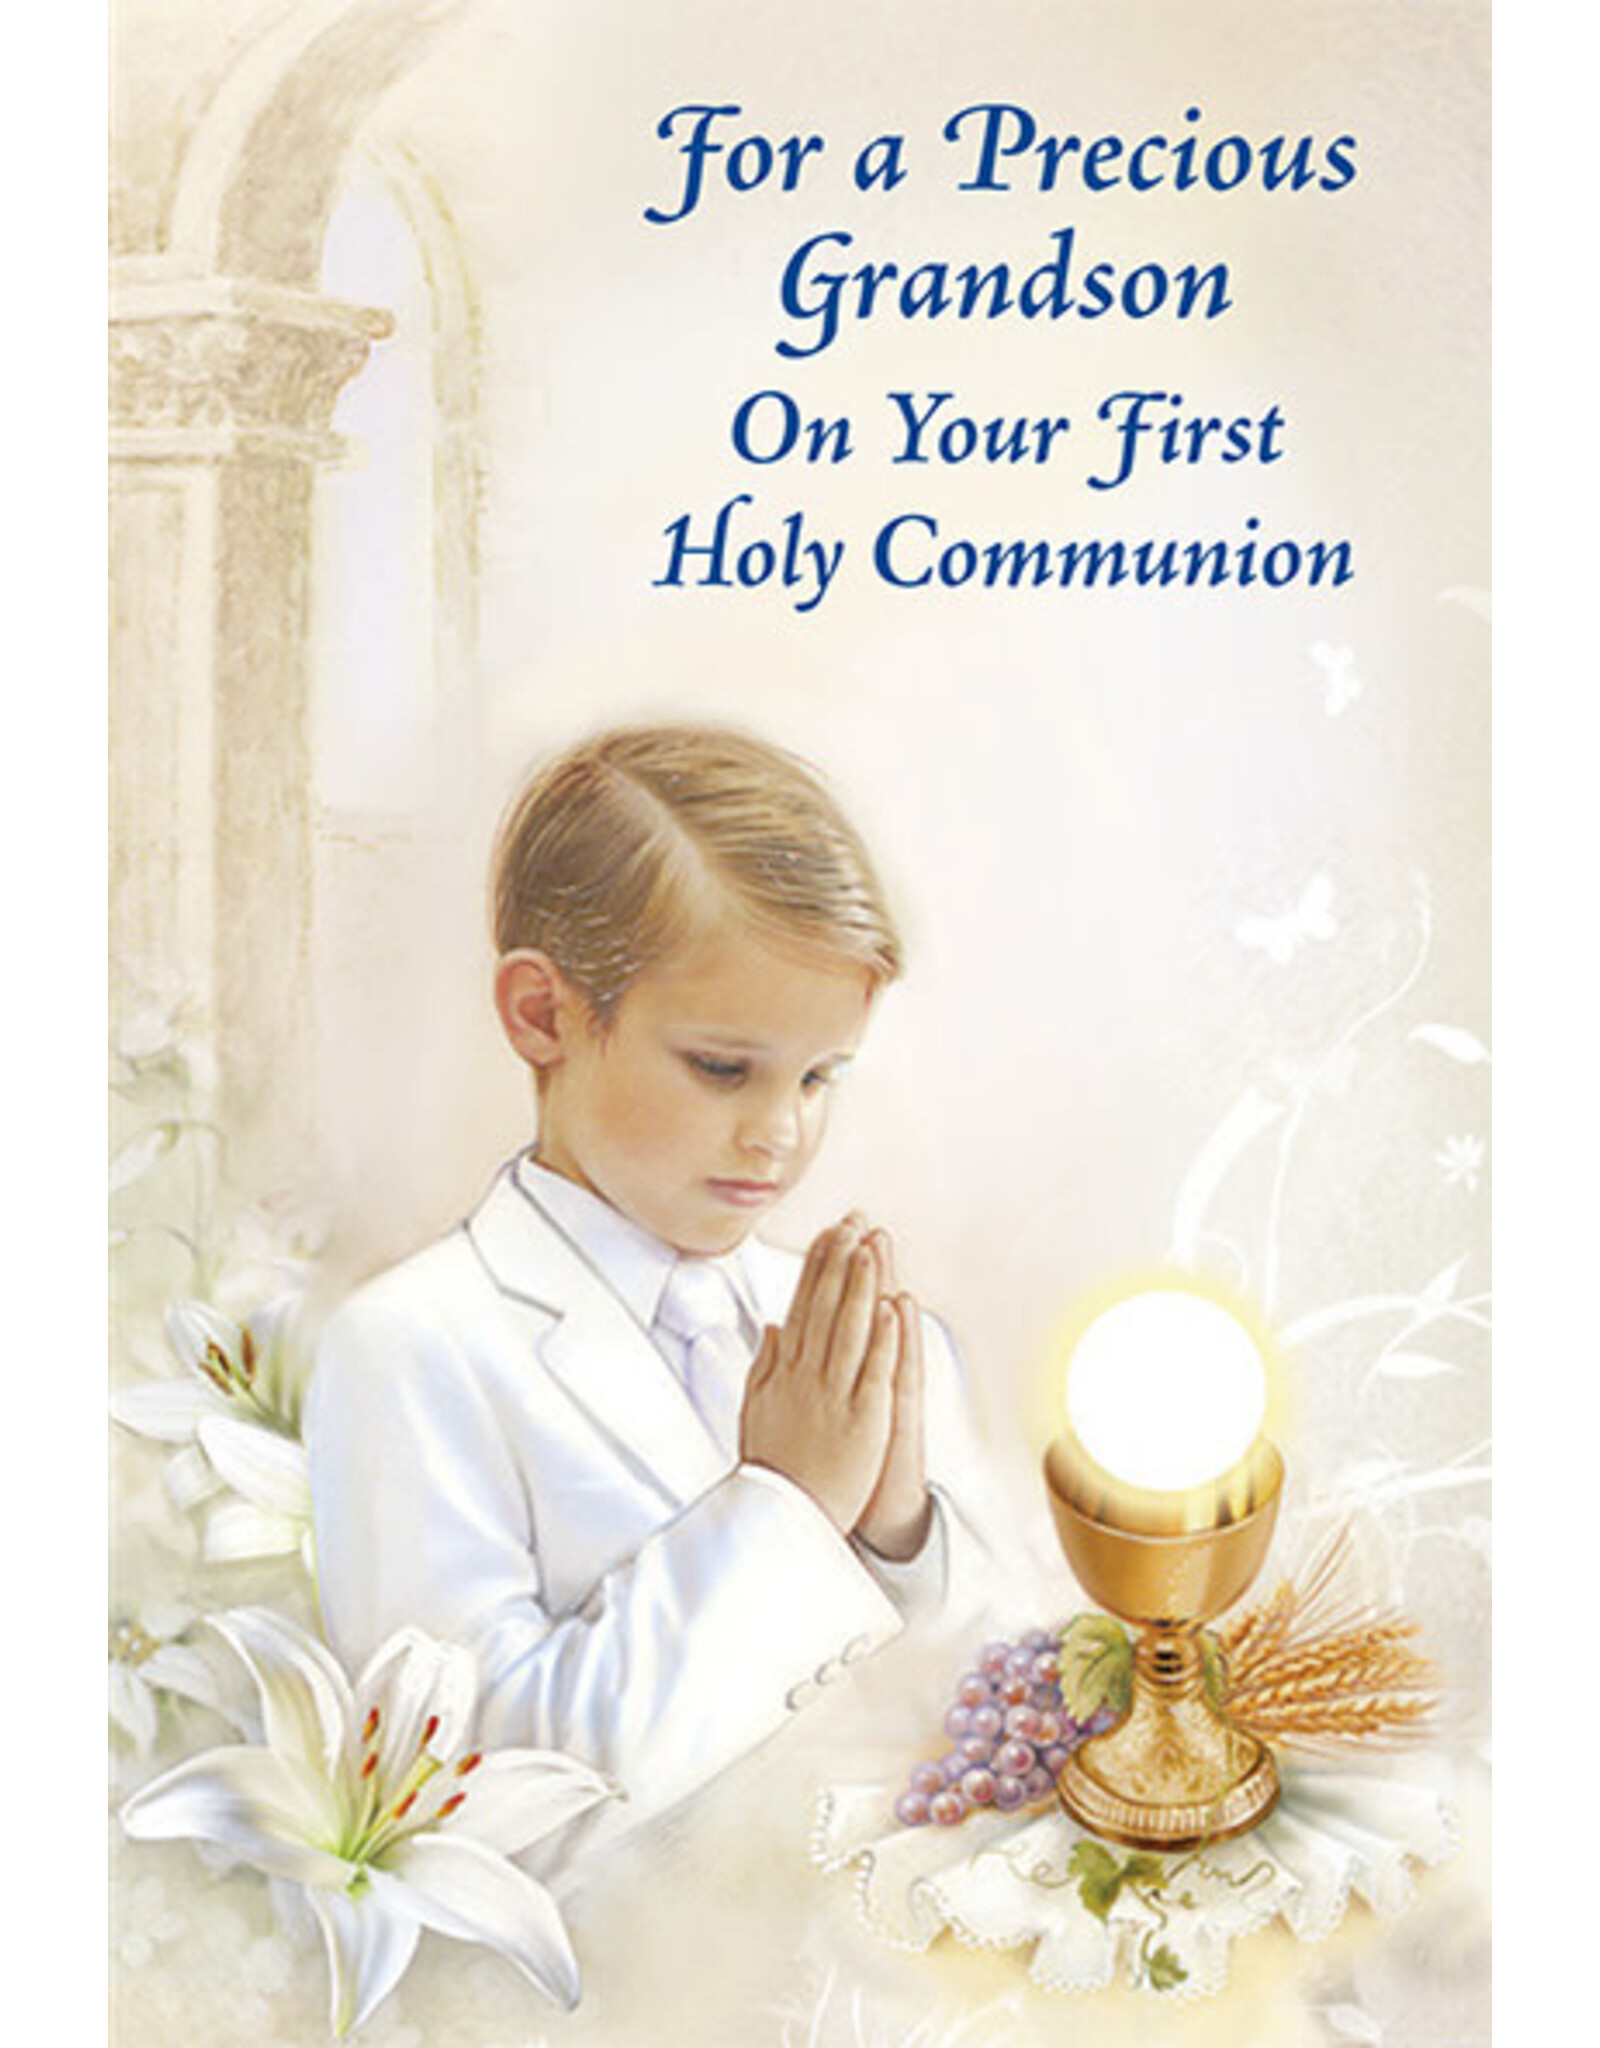 Greetings of Faith Card - First Communion (Grandson), Praying Hands